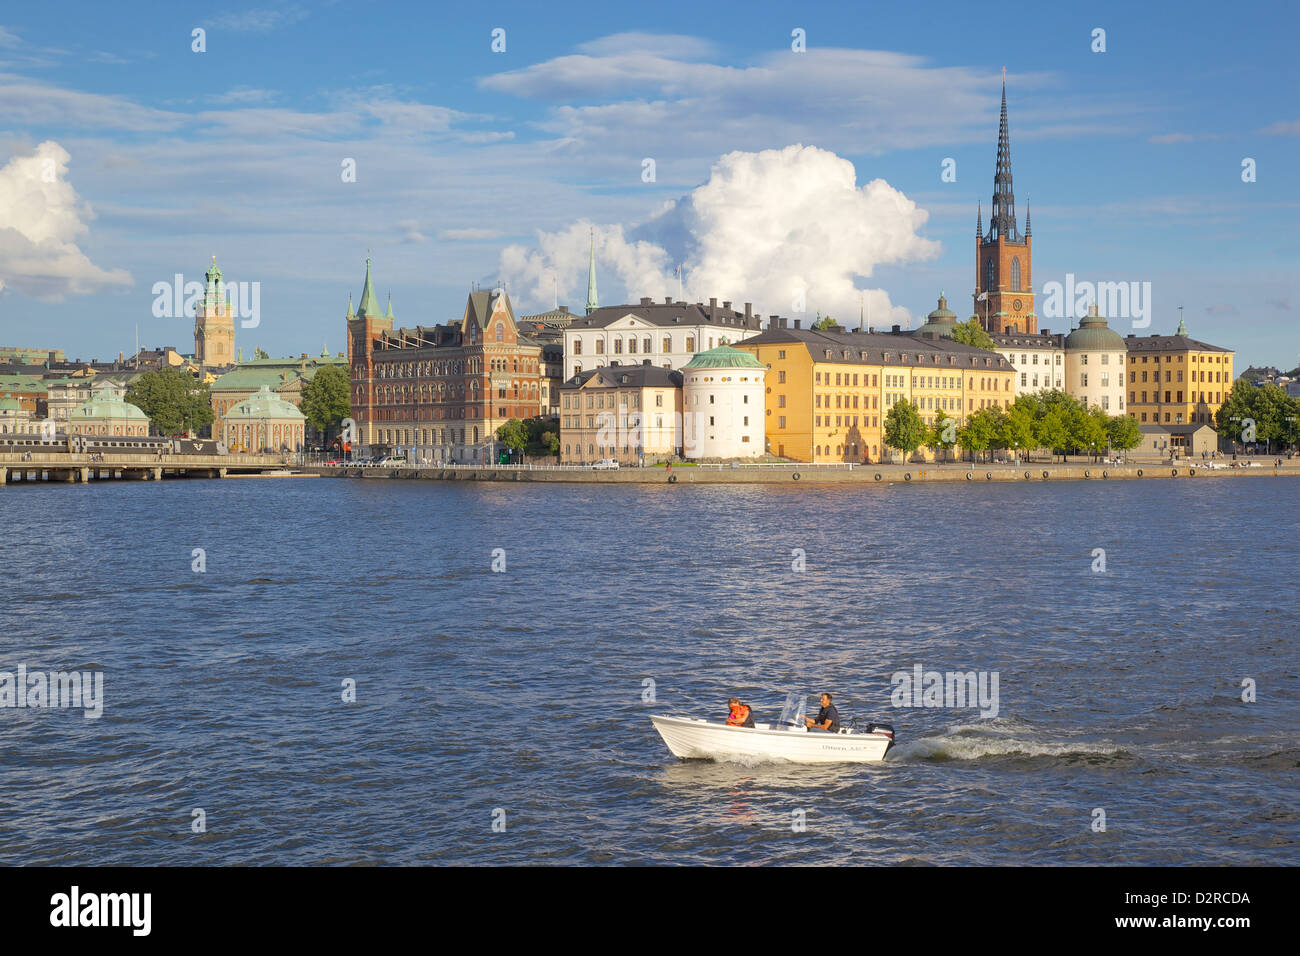 City skyline from City Hall, Stockholm, Sweden, Europe Stock Photo